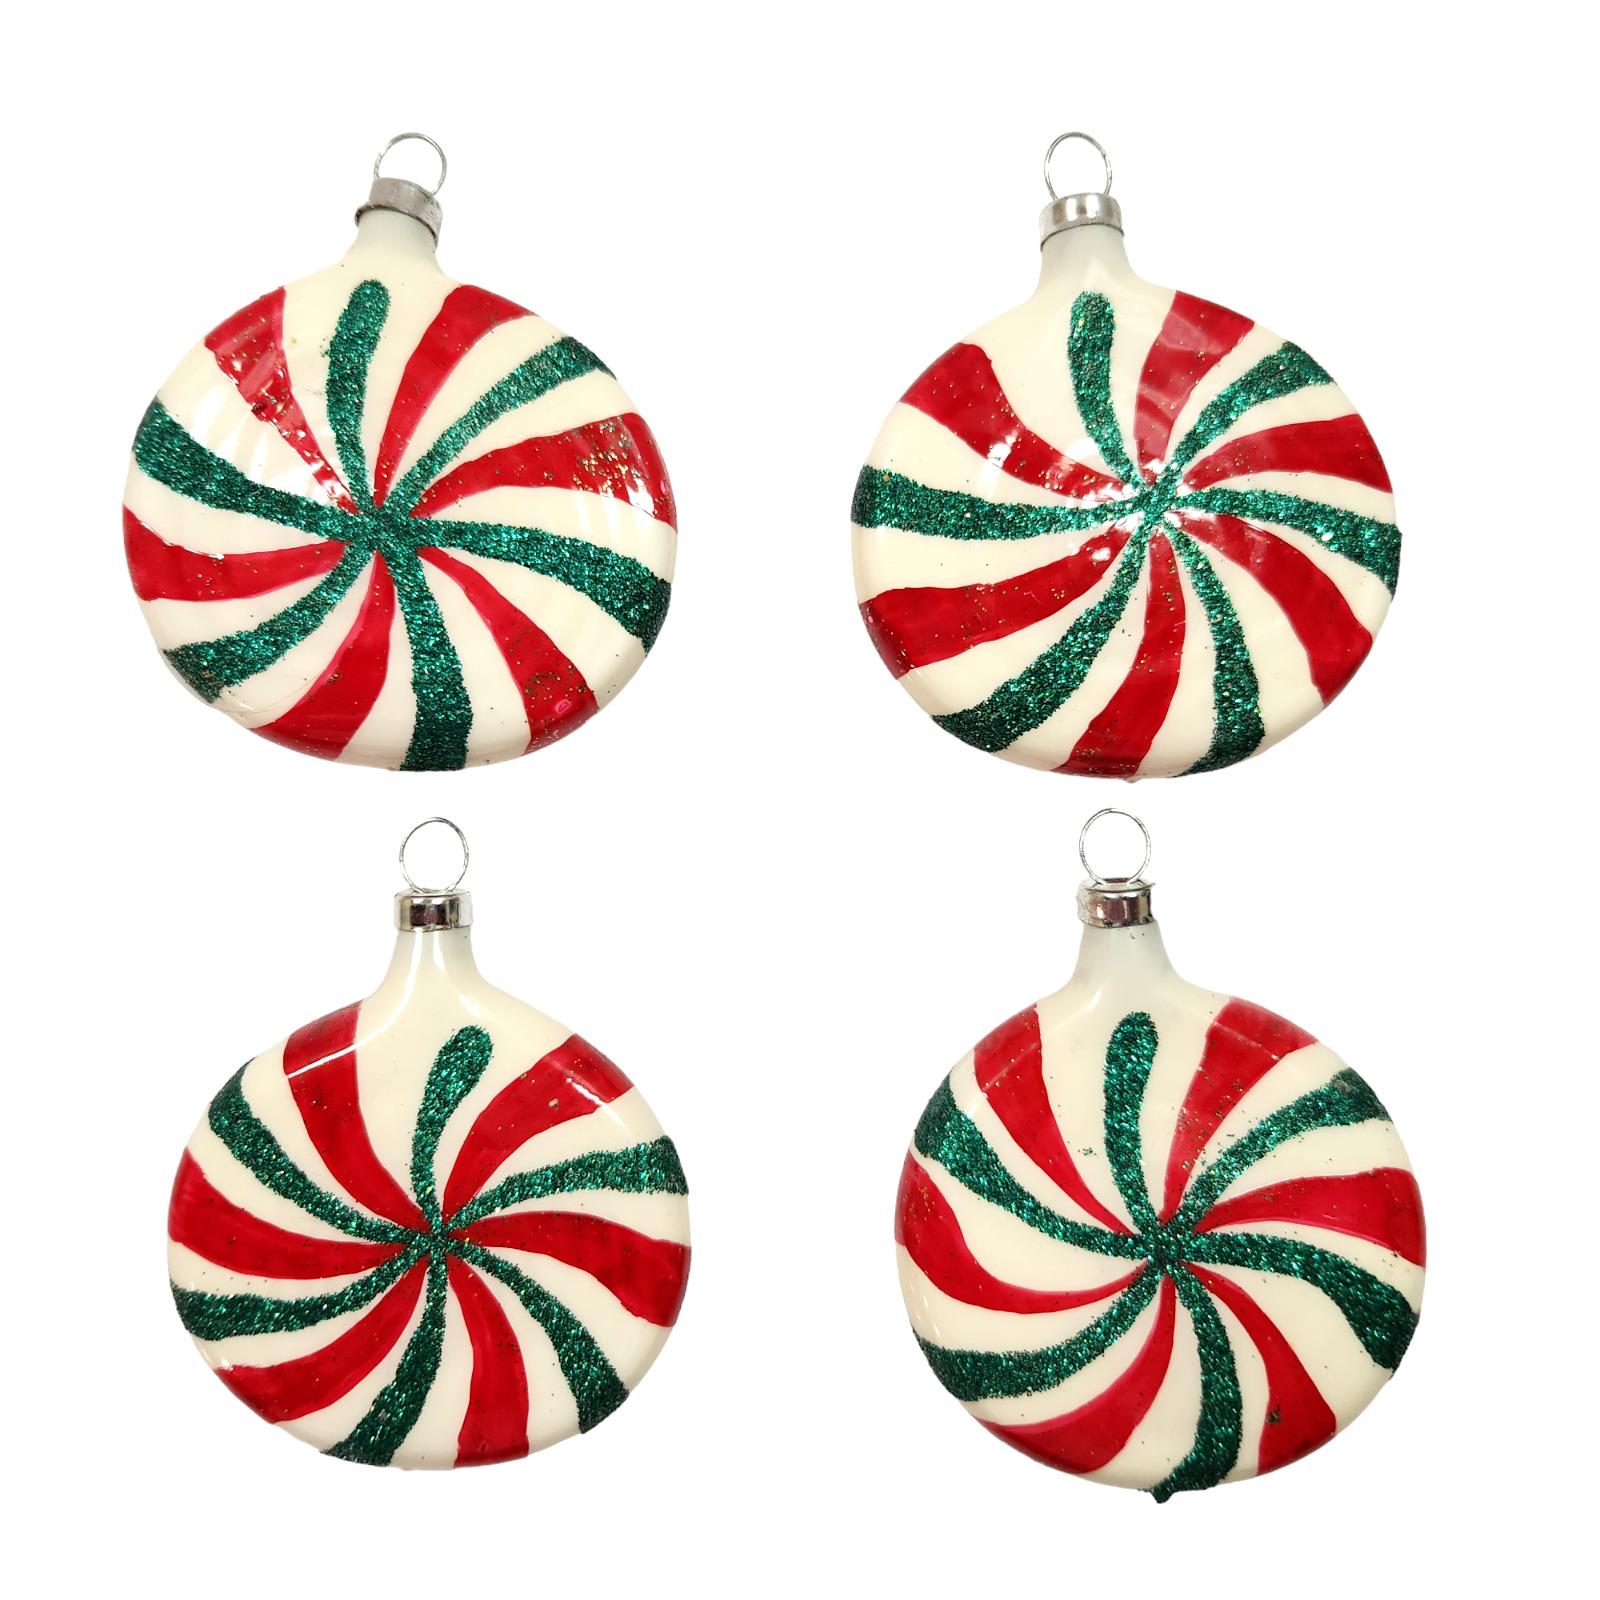 Set of 4 Glittery Striped Peppermint Candy Christmas Tree Ornaments